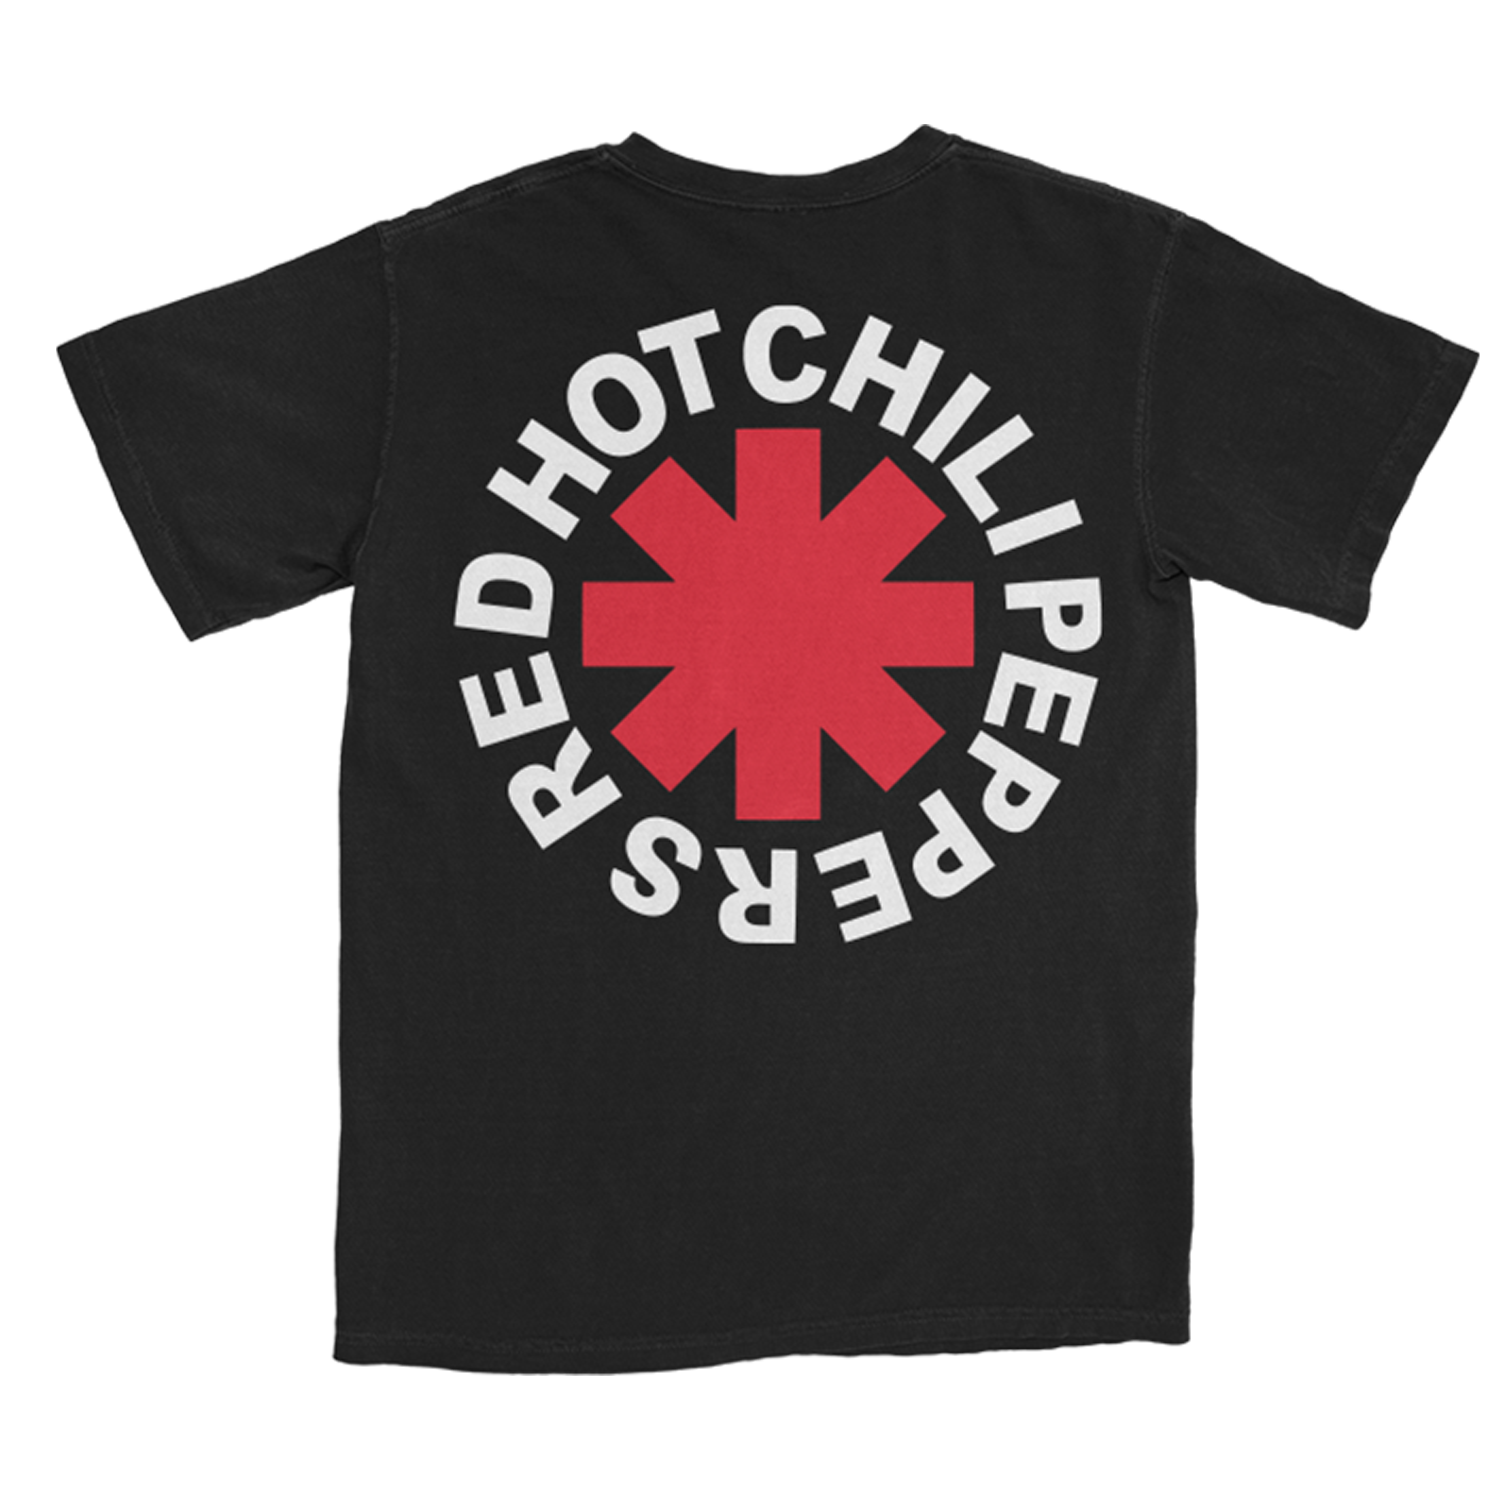 Red Hot Chili Peppers ロンT グッズ レッチリ Tシャツ | labiela.com